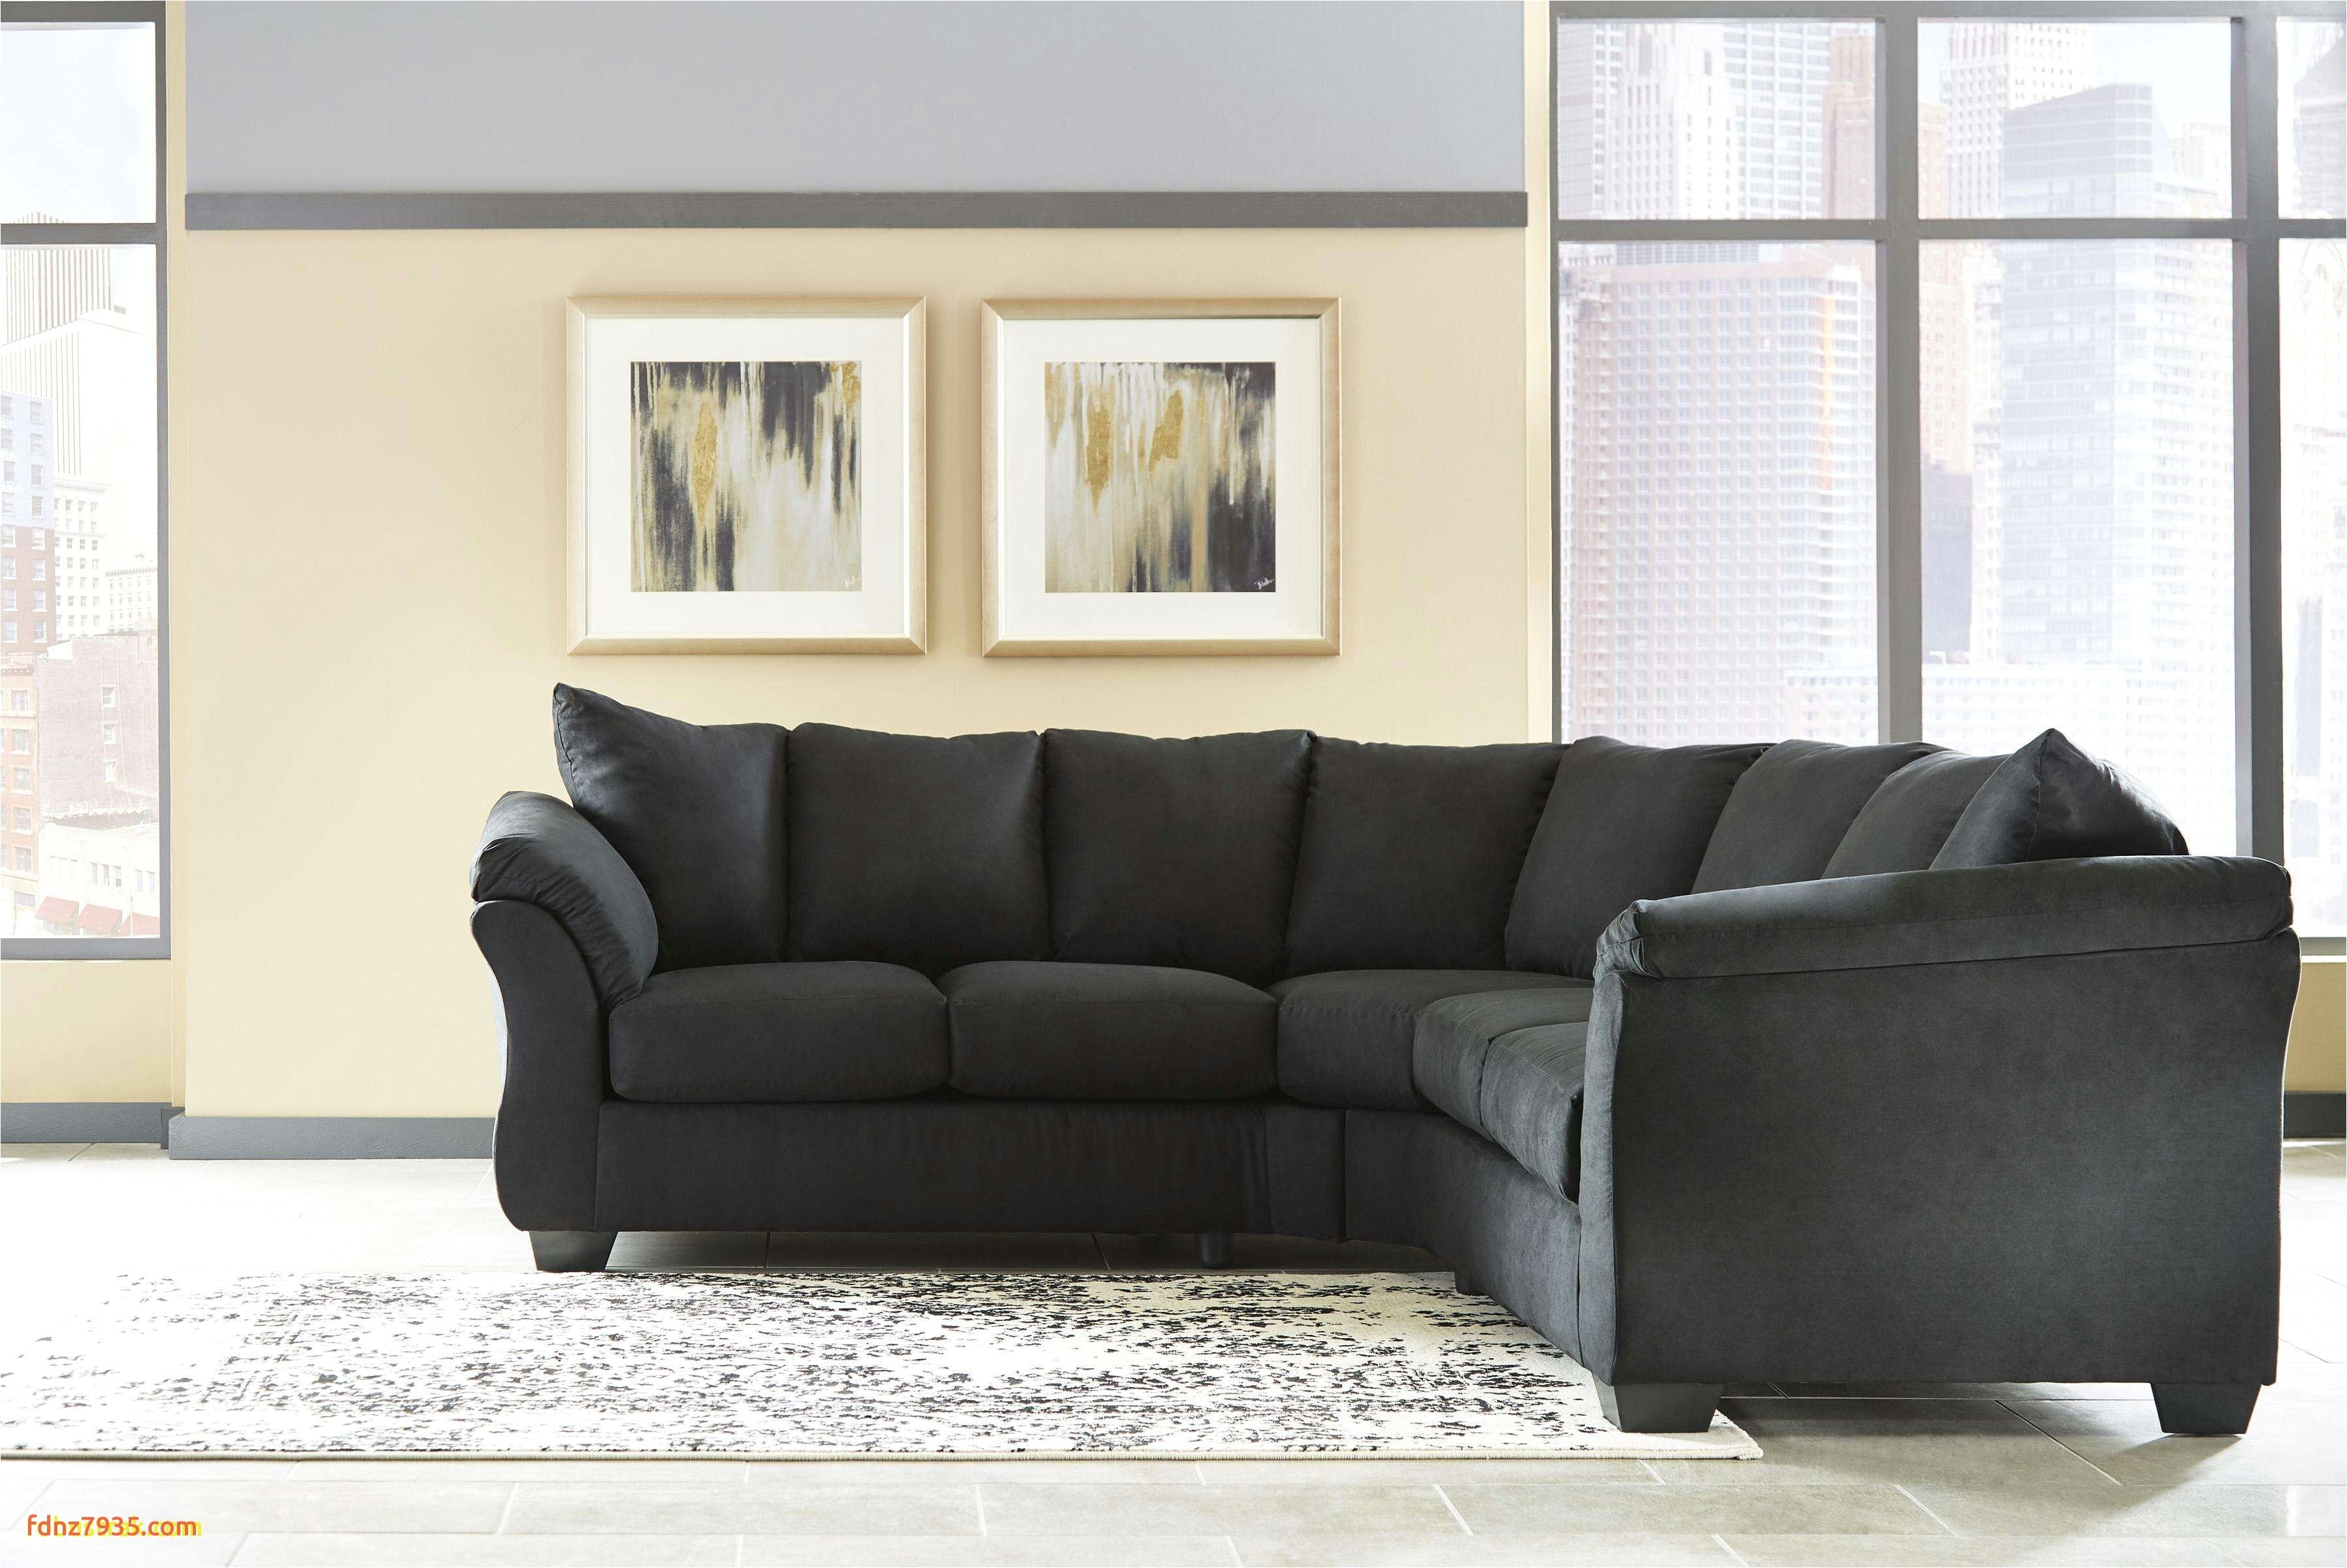 Drawing L Shape sofa L Shaped Sectional Couch Fresh sofa Design